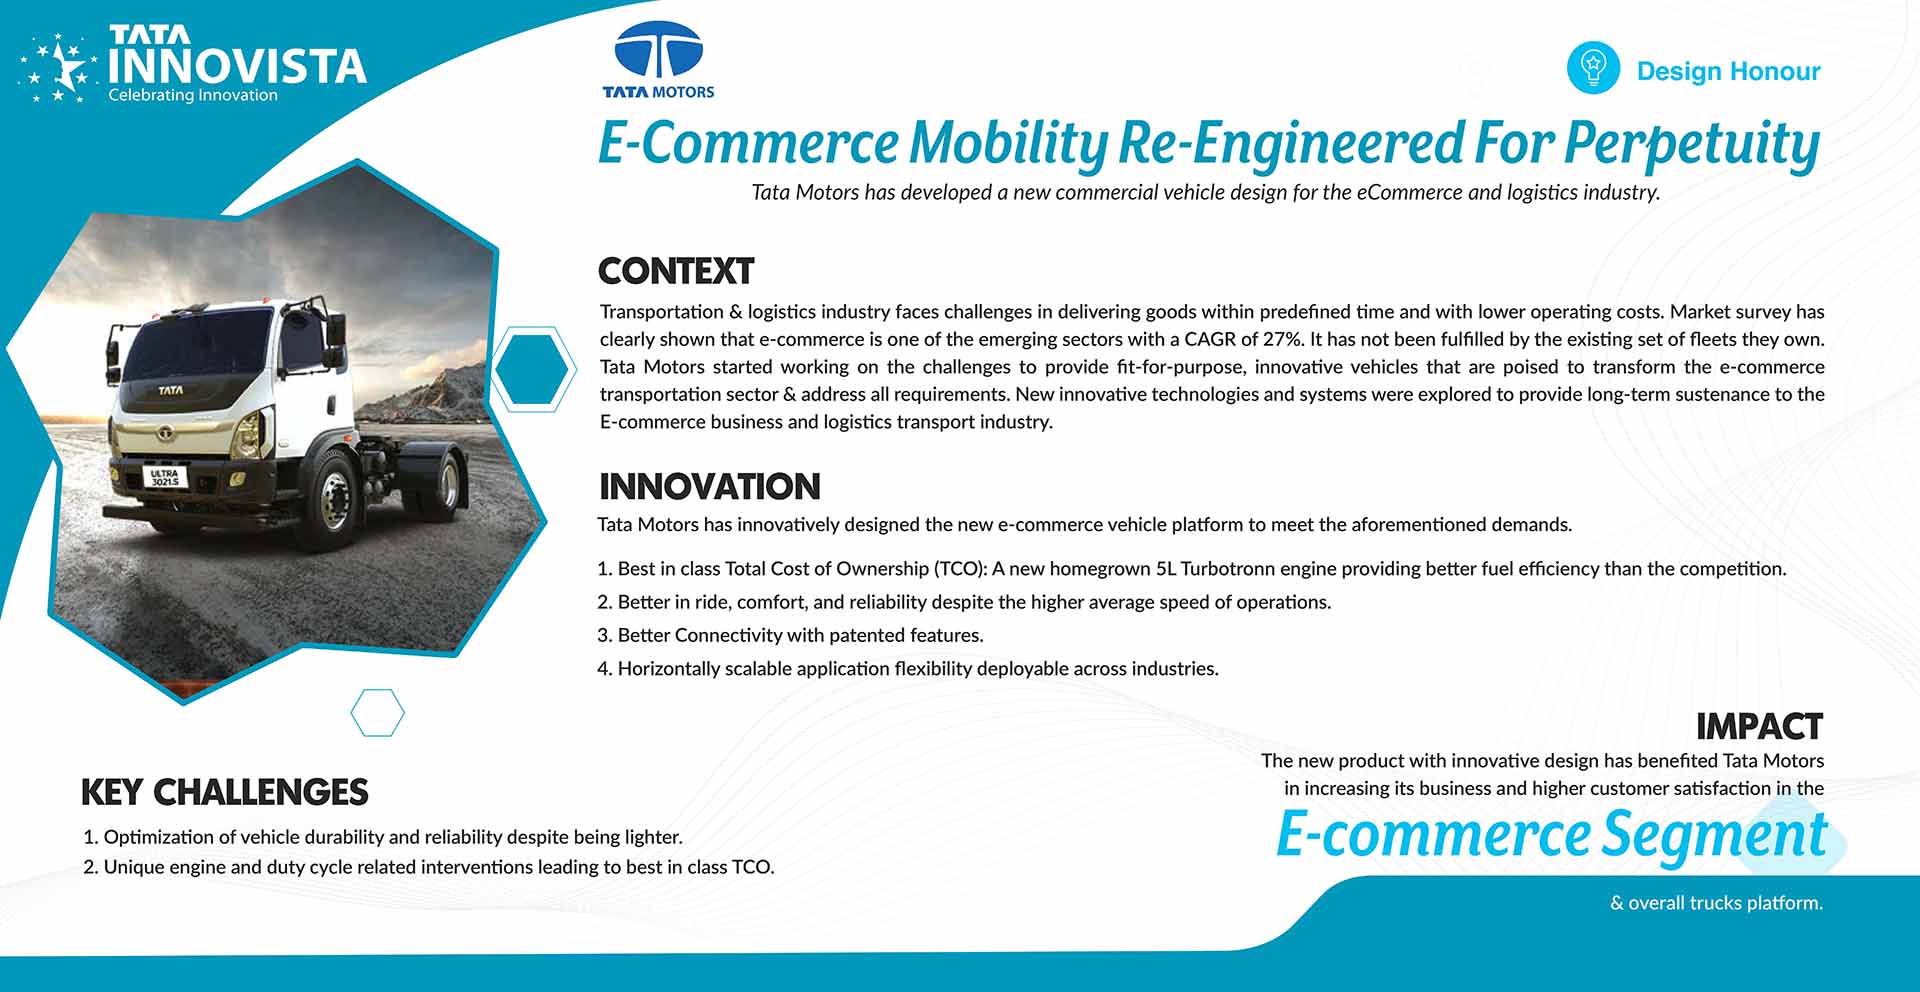 E-Commerce Mobility: Re-Engineered For Perpetuity